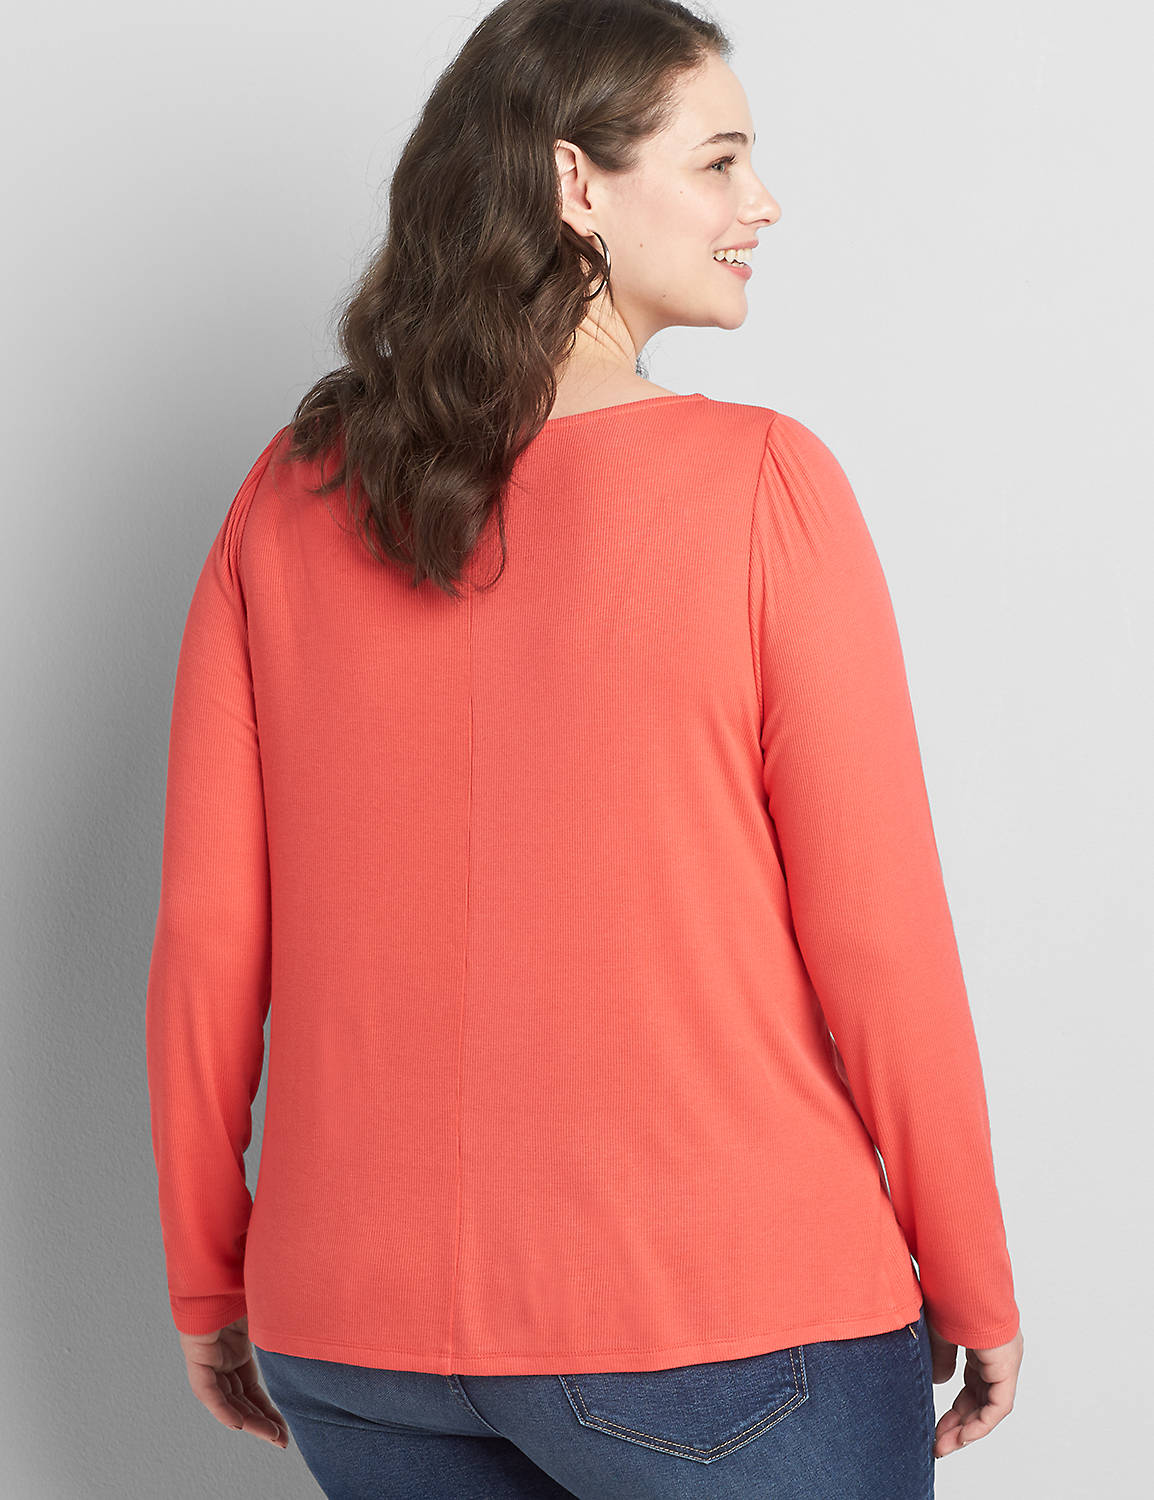 Long Sleeve Twist Neck Fitted Rib Top 1118539:Starfish Coral CSI 0301184:10/12 Product Image 2